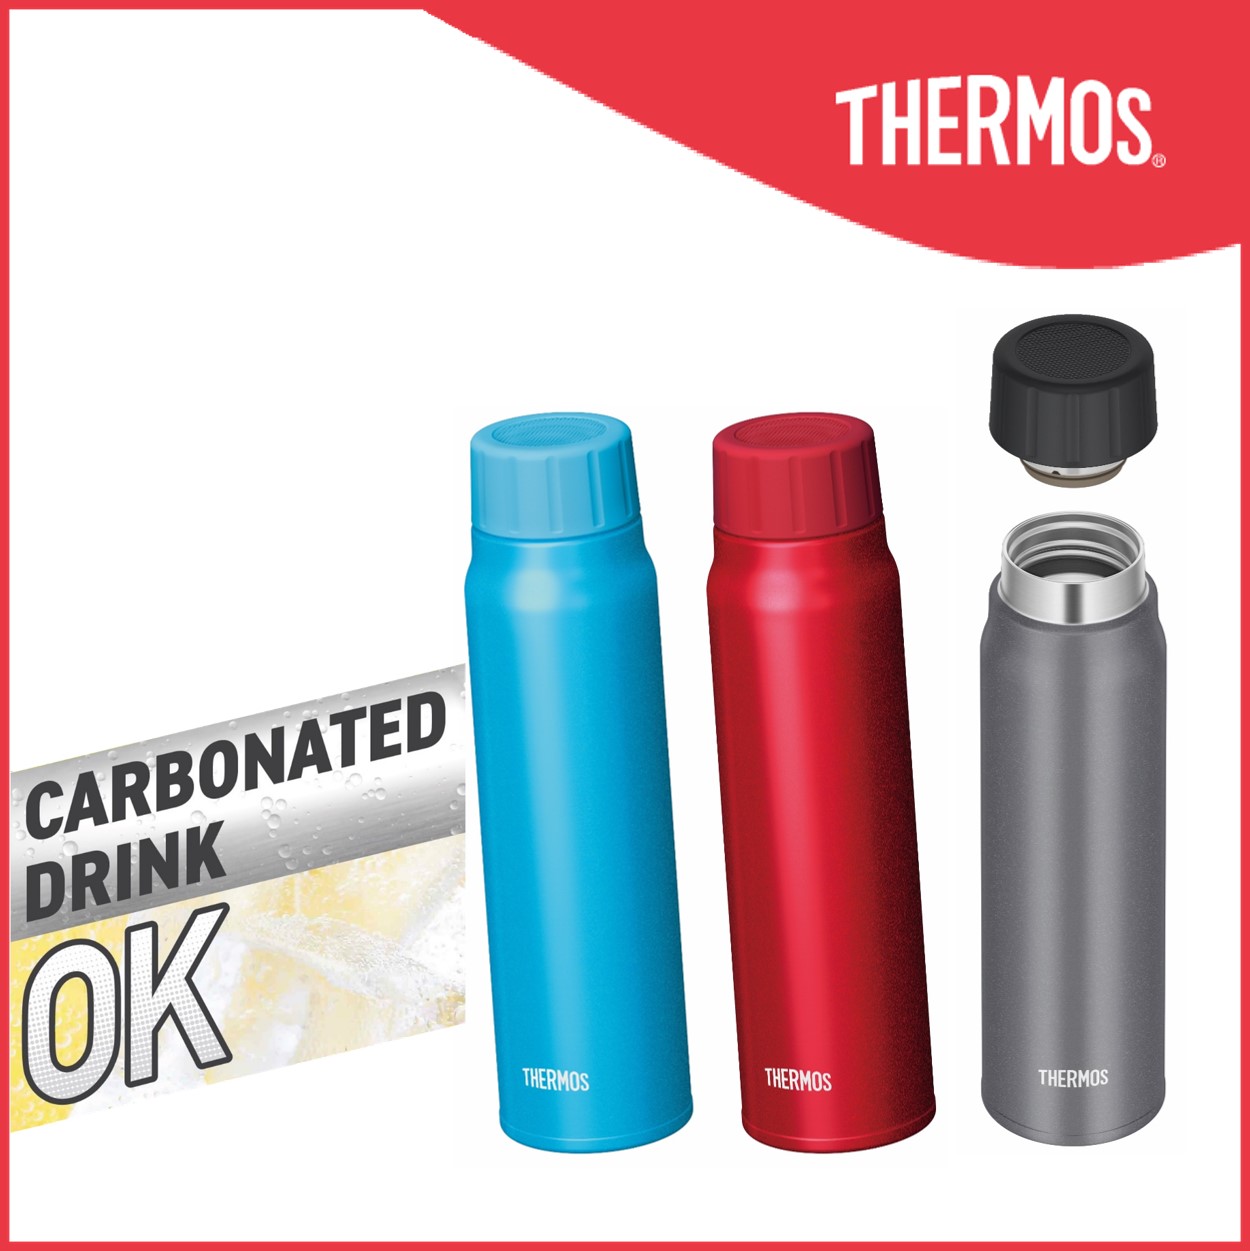 New THERMOS Cold Insulated Carbonated Drink Bottle 750ml Red FJK